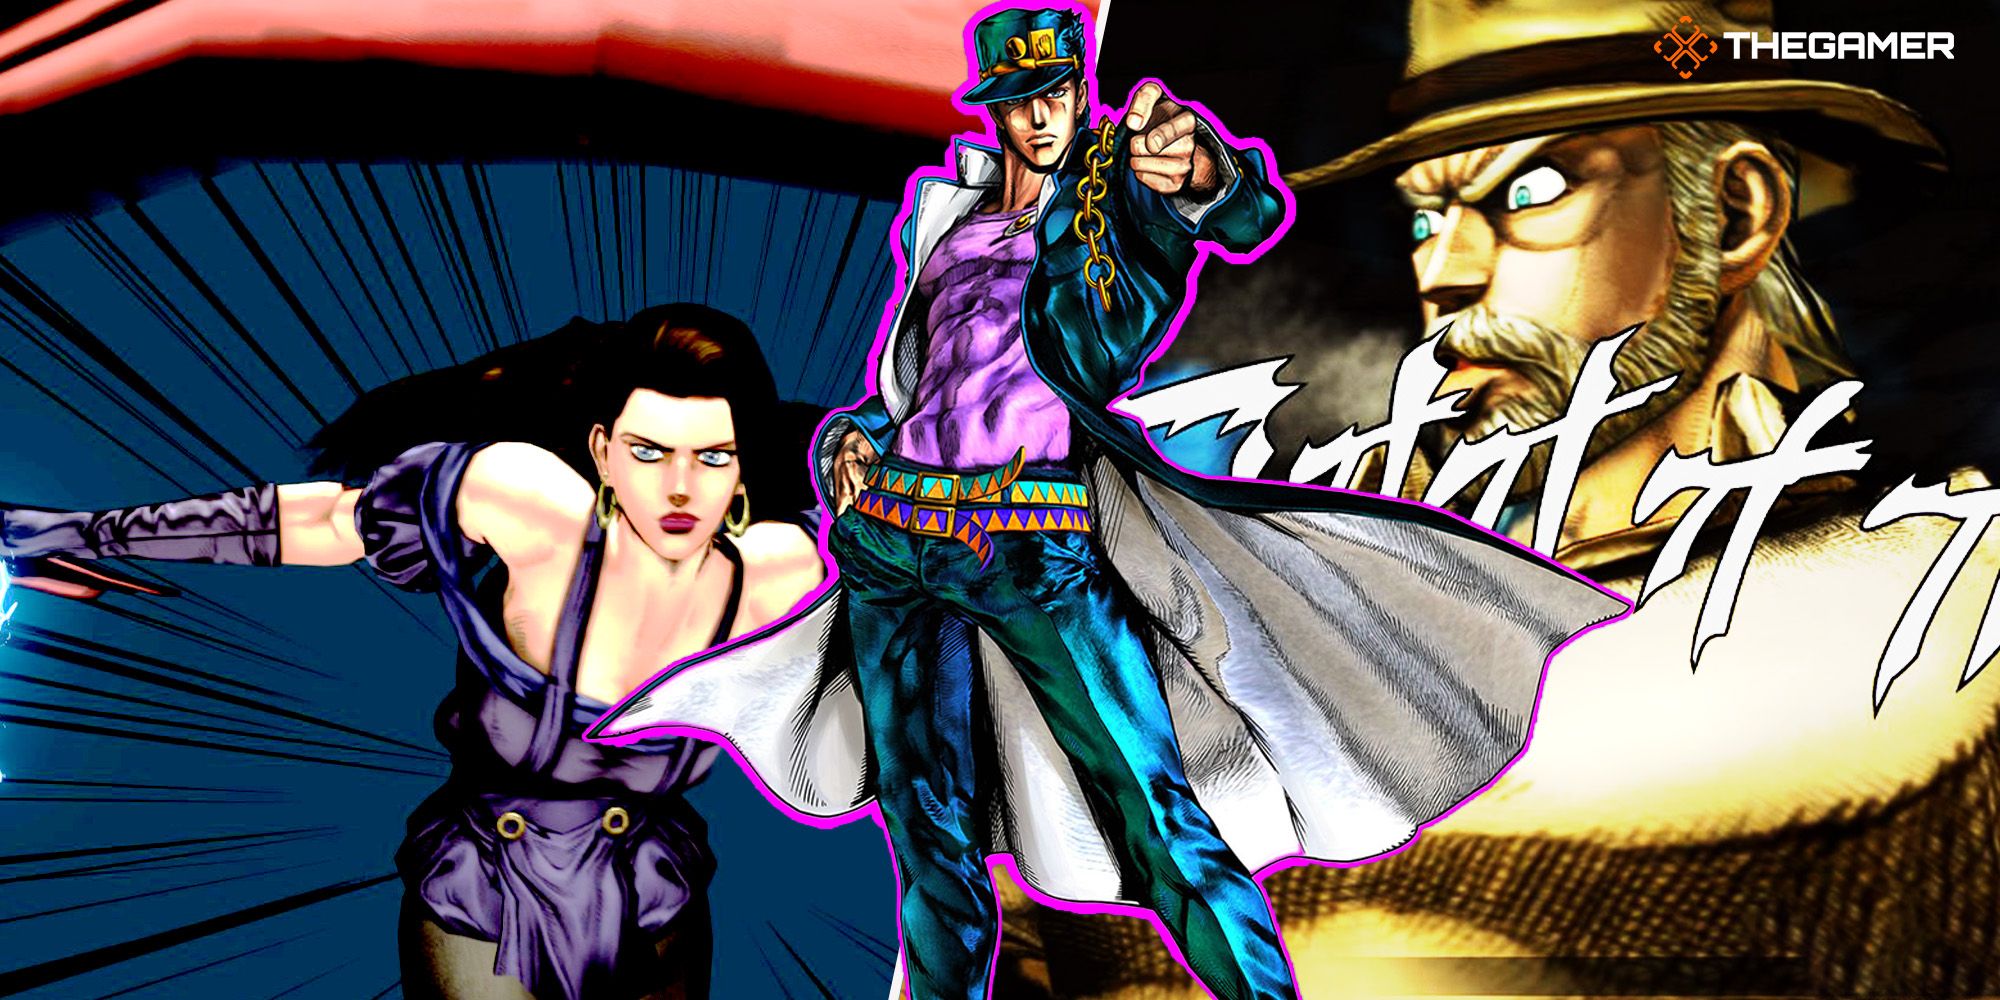 Background: [Panel 1] Lisa Lisa unleashes her Hamon infused scarf. [Panel 2] Old Joseph Joestar charges Hamon to unleash a powerful attack. Foreground: Jotaro Kujo points forward in a confident pose. Custom Image for Jojo's Bizarre Adventure ASBR.